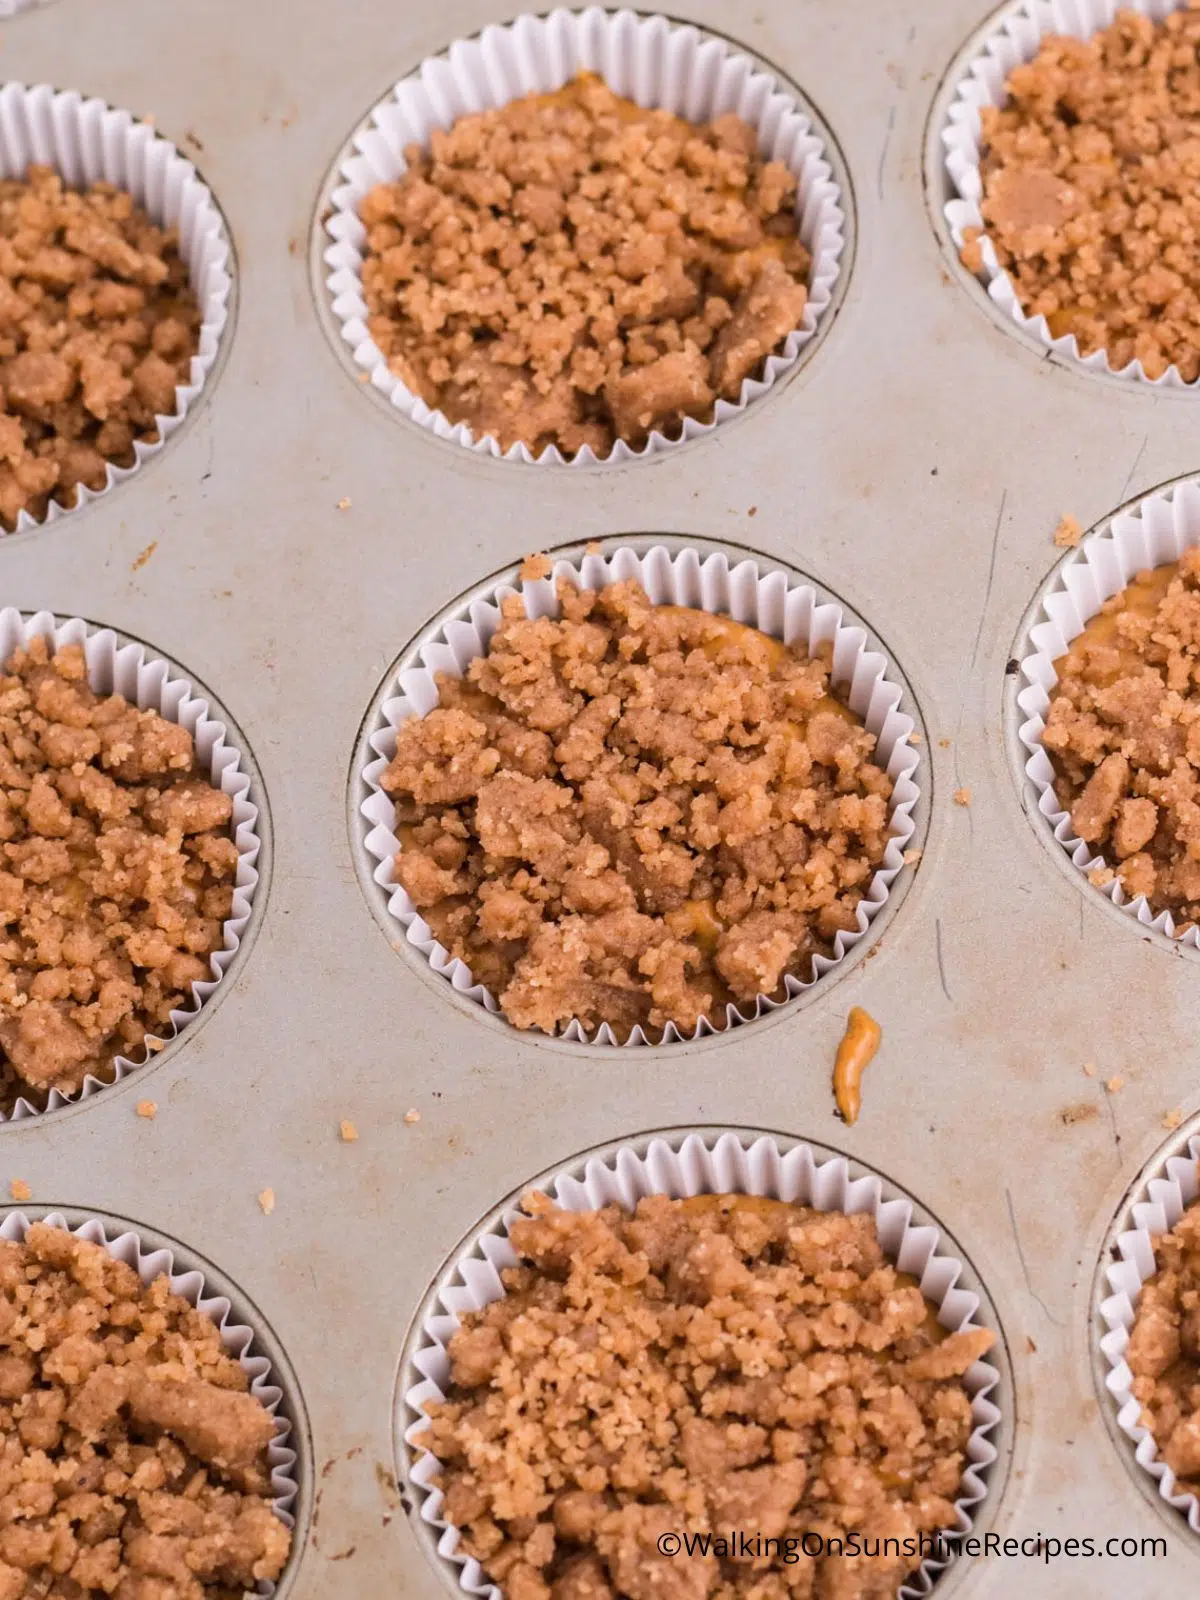 Add crumb mixture to the top of unbaked muffins.